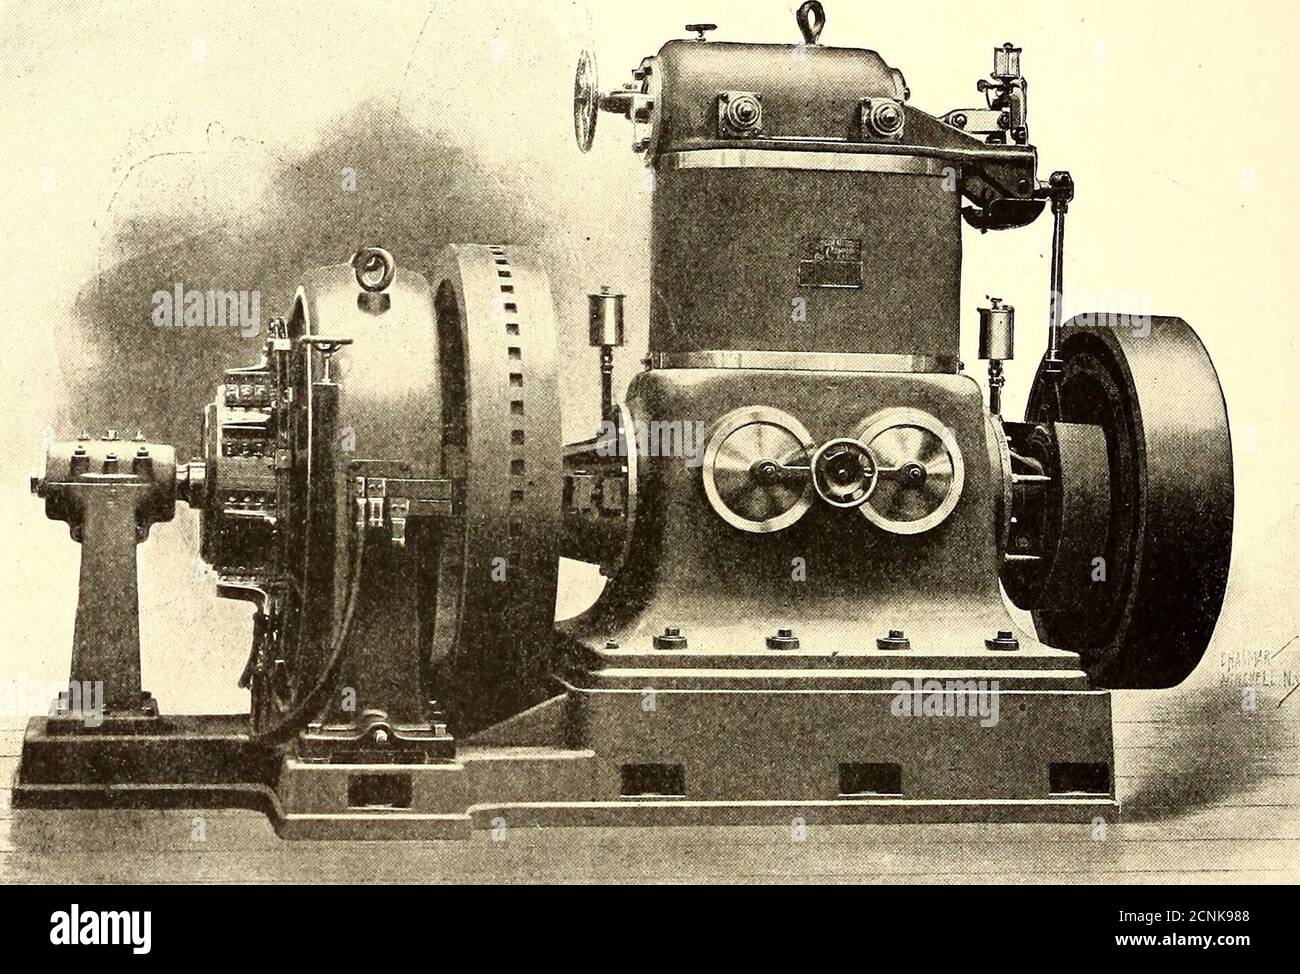 . The Street railway journal . Westinghouse Rotary Converters Of the same type as the one shown here, are in successfuloperation in the Power Houses of the Glasgow CorporationTramways, and the London United Tramways Company The British Westinghouse Electric & flfg. Co., Ltd. Head Offices: London, Norfolk Street, Strand, W. C. Branch Offices: rianchester, 5, Cross Street.Glasgow, 65, Renfield Street.Newcastle-on-Tyne, Collingwood BIdgs., Collingwood Street.Cardiff, Phoenix BIdgs,, Mount Stuart Sq. Works: rianchester, Trafford Park. For Australia, New Zealand and Tasmania, communicate with Sydne Stock Photo